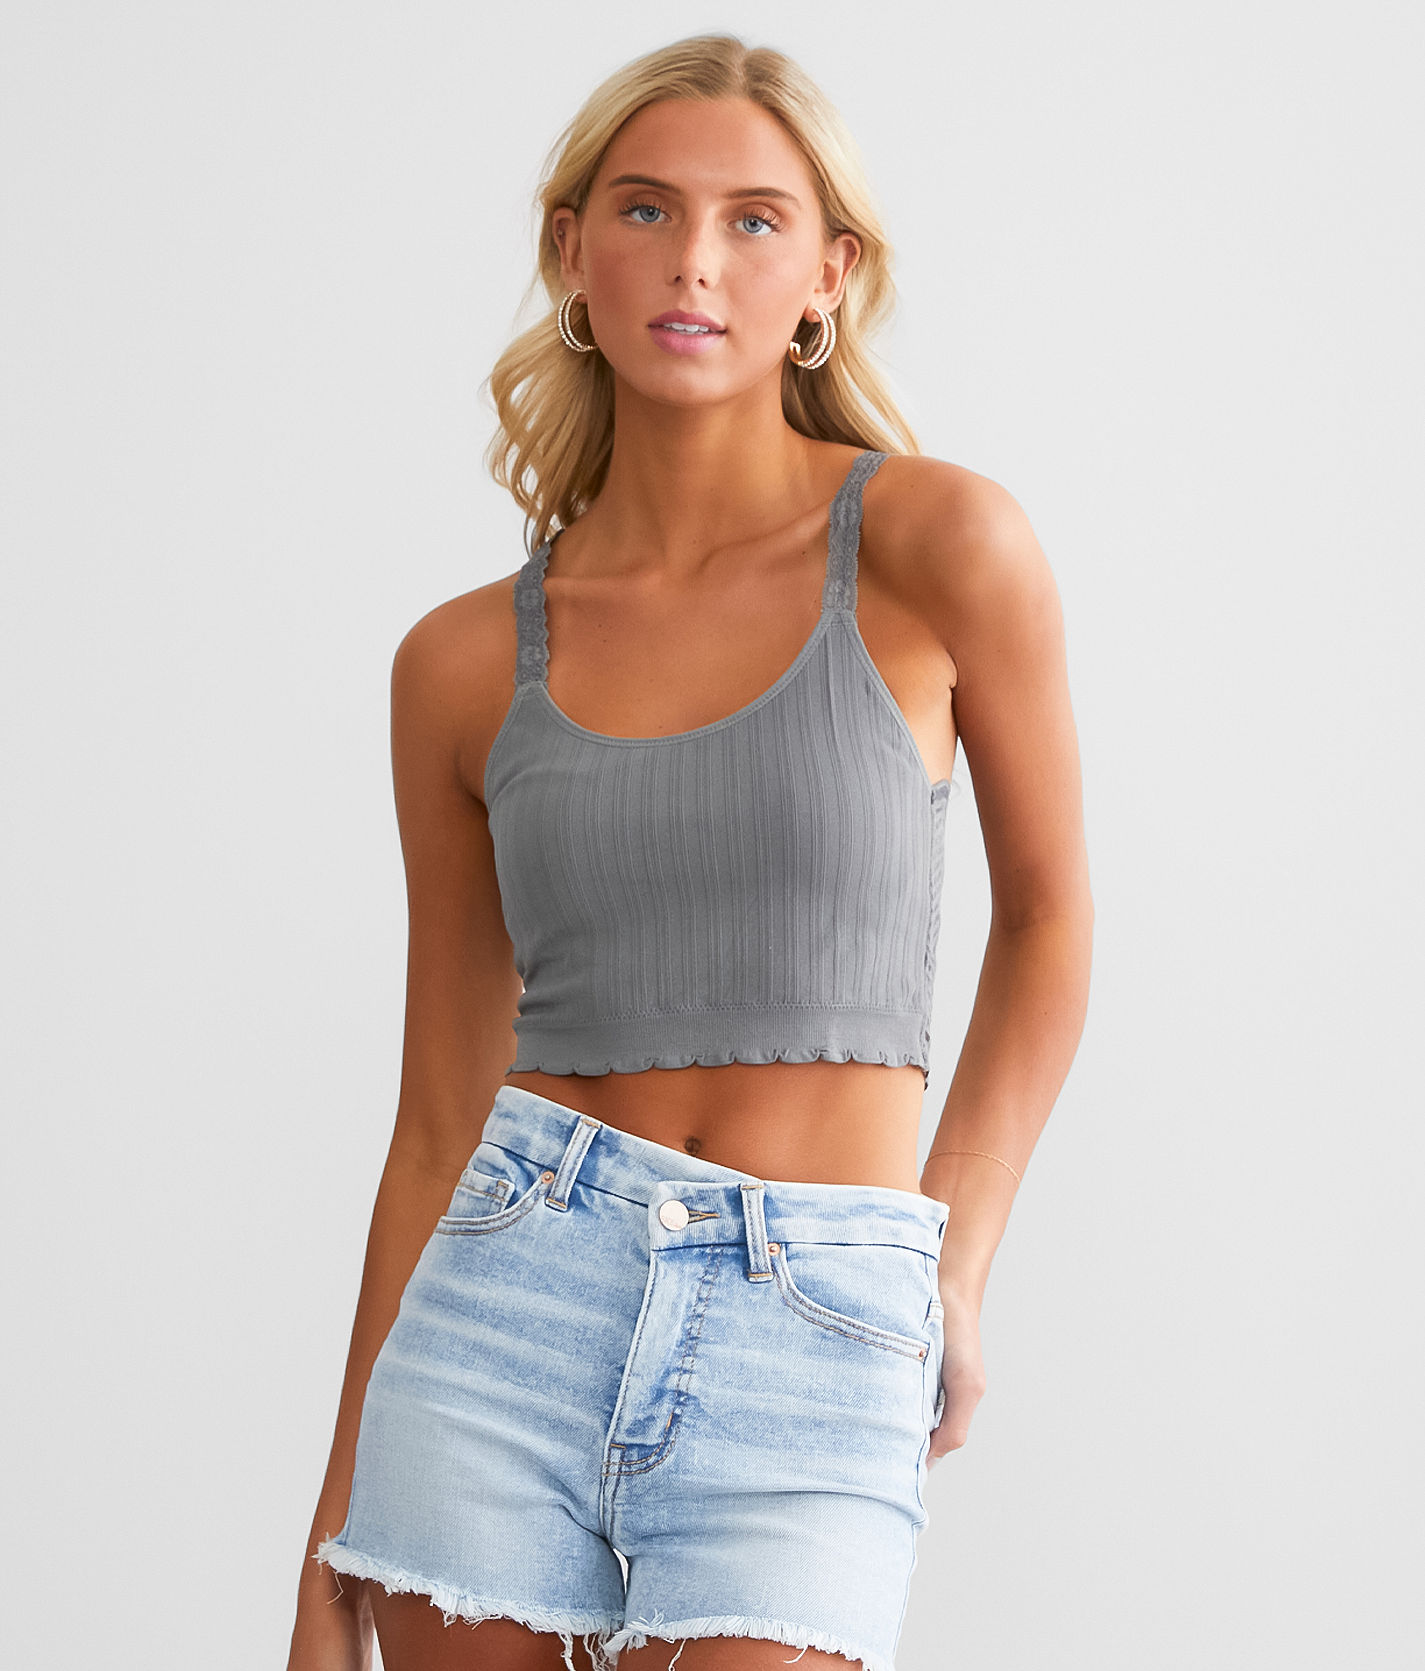 BKEssentials Ribbed Full Coverage Bralette - Women's Bandeaus/Bralettes in  Sedona Sage